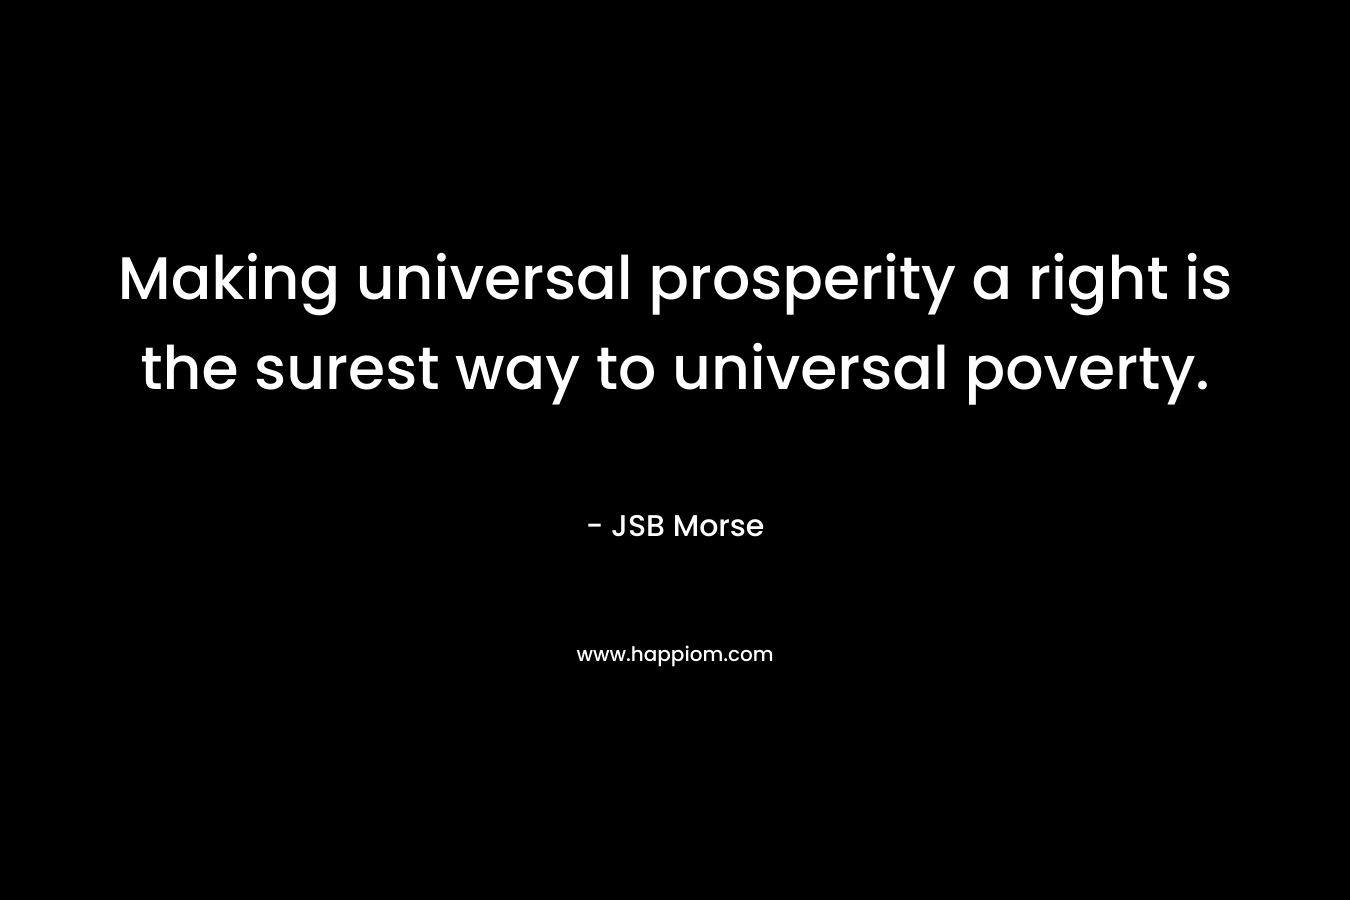 Making universal prosperity a right is the surest way to universal poverty. – JSB Morse